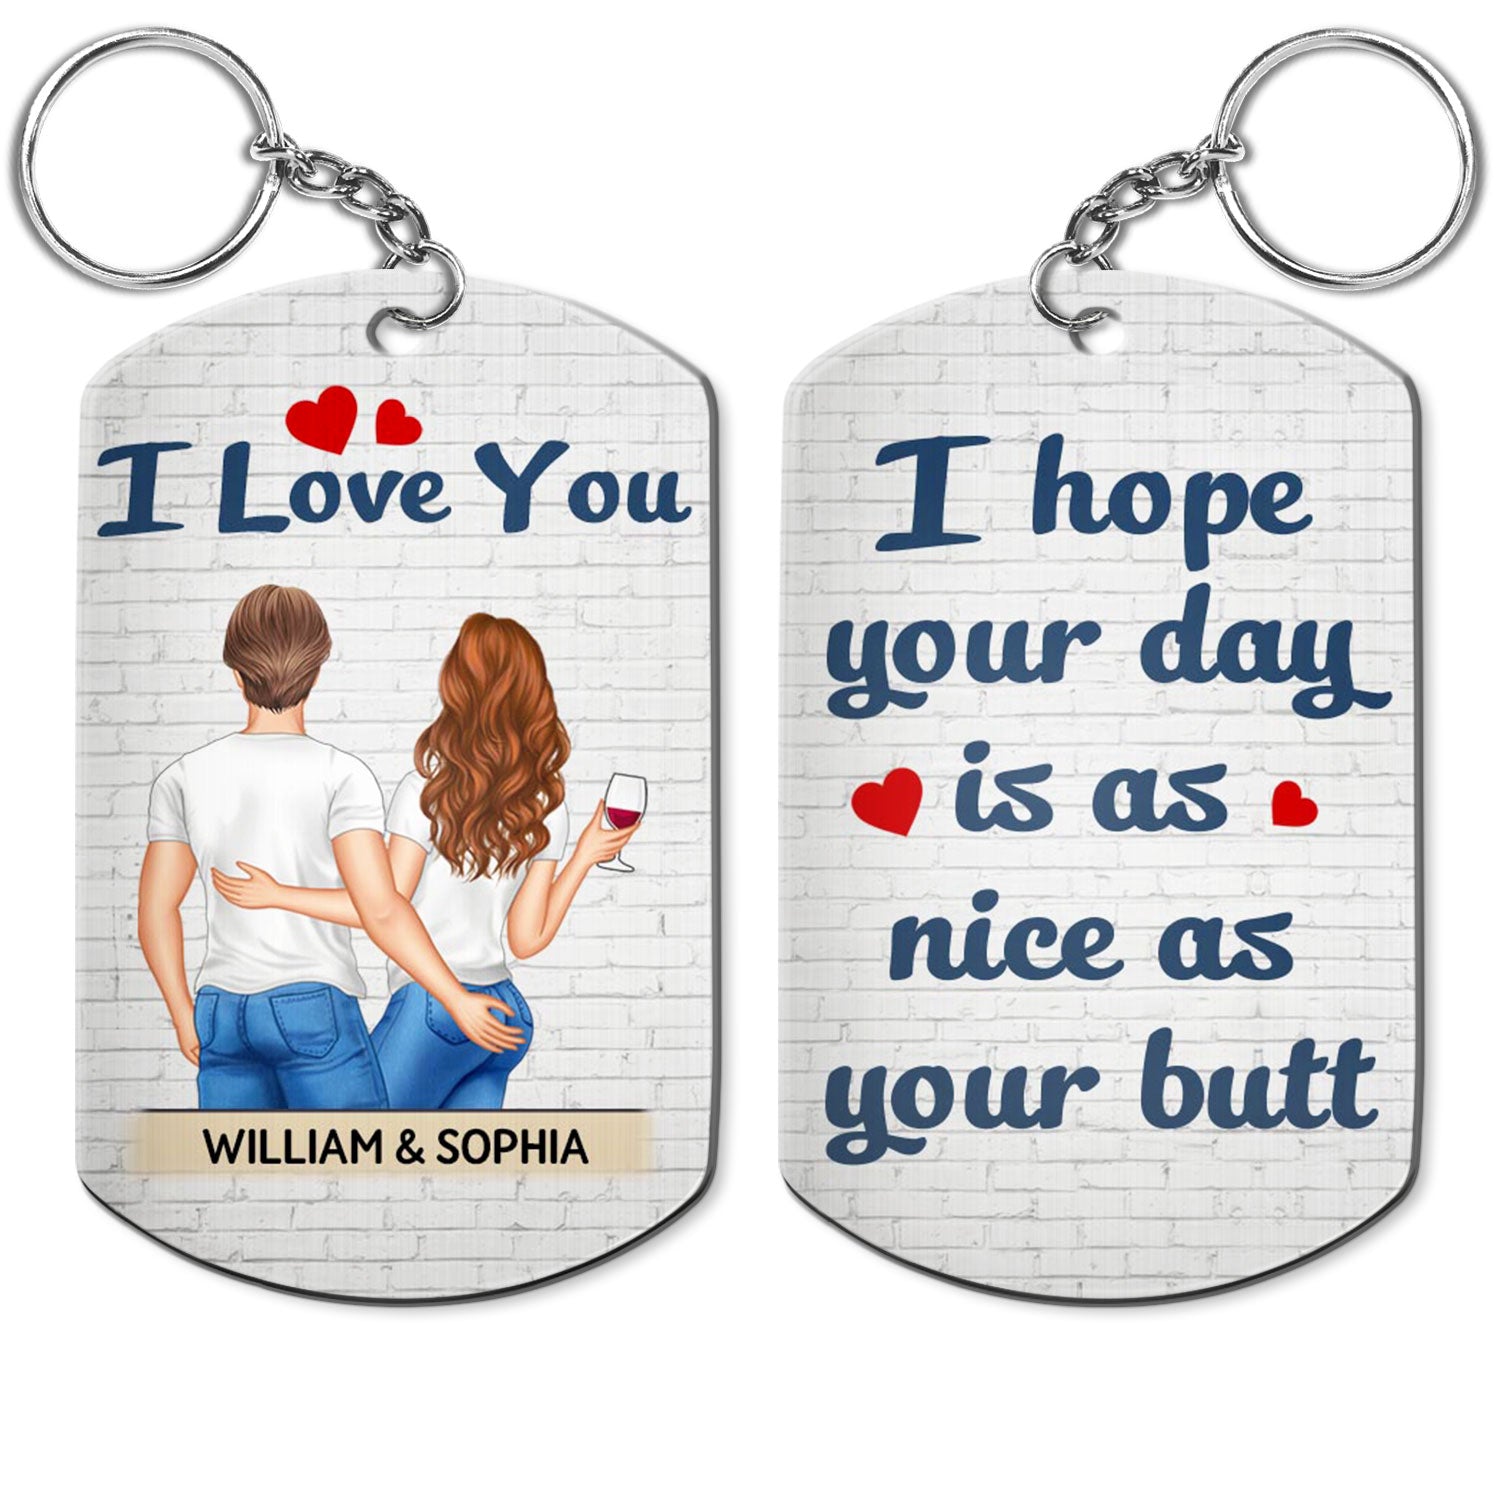 I Hope Your Day Backside - Anniversary, Vacation, Funny Gift For Couples, Family - Personalized Aluminum Keychain